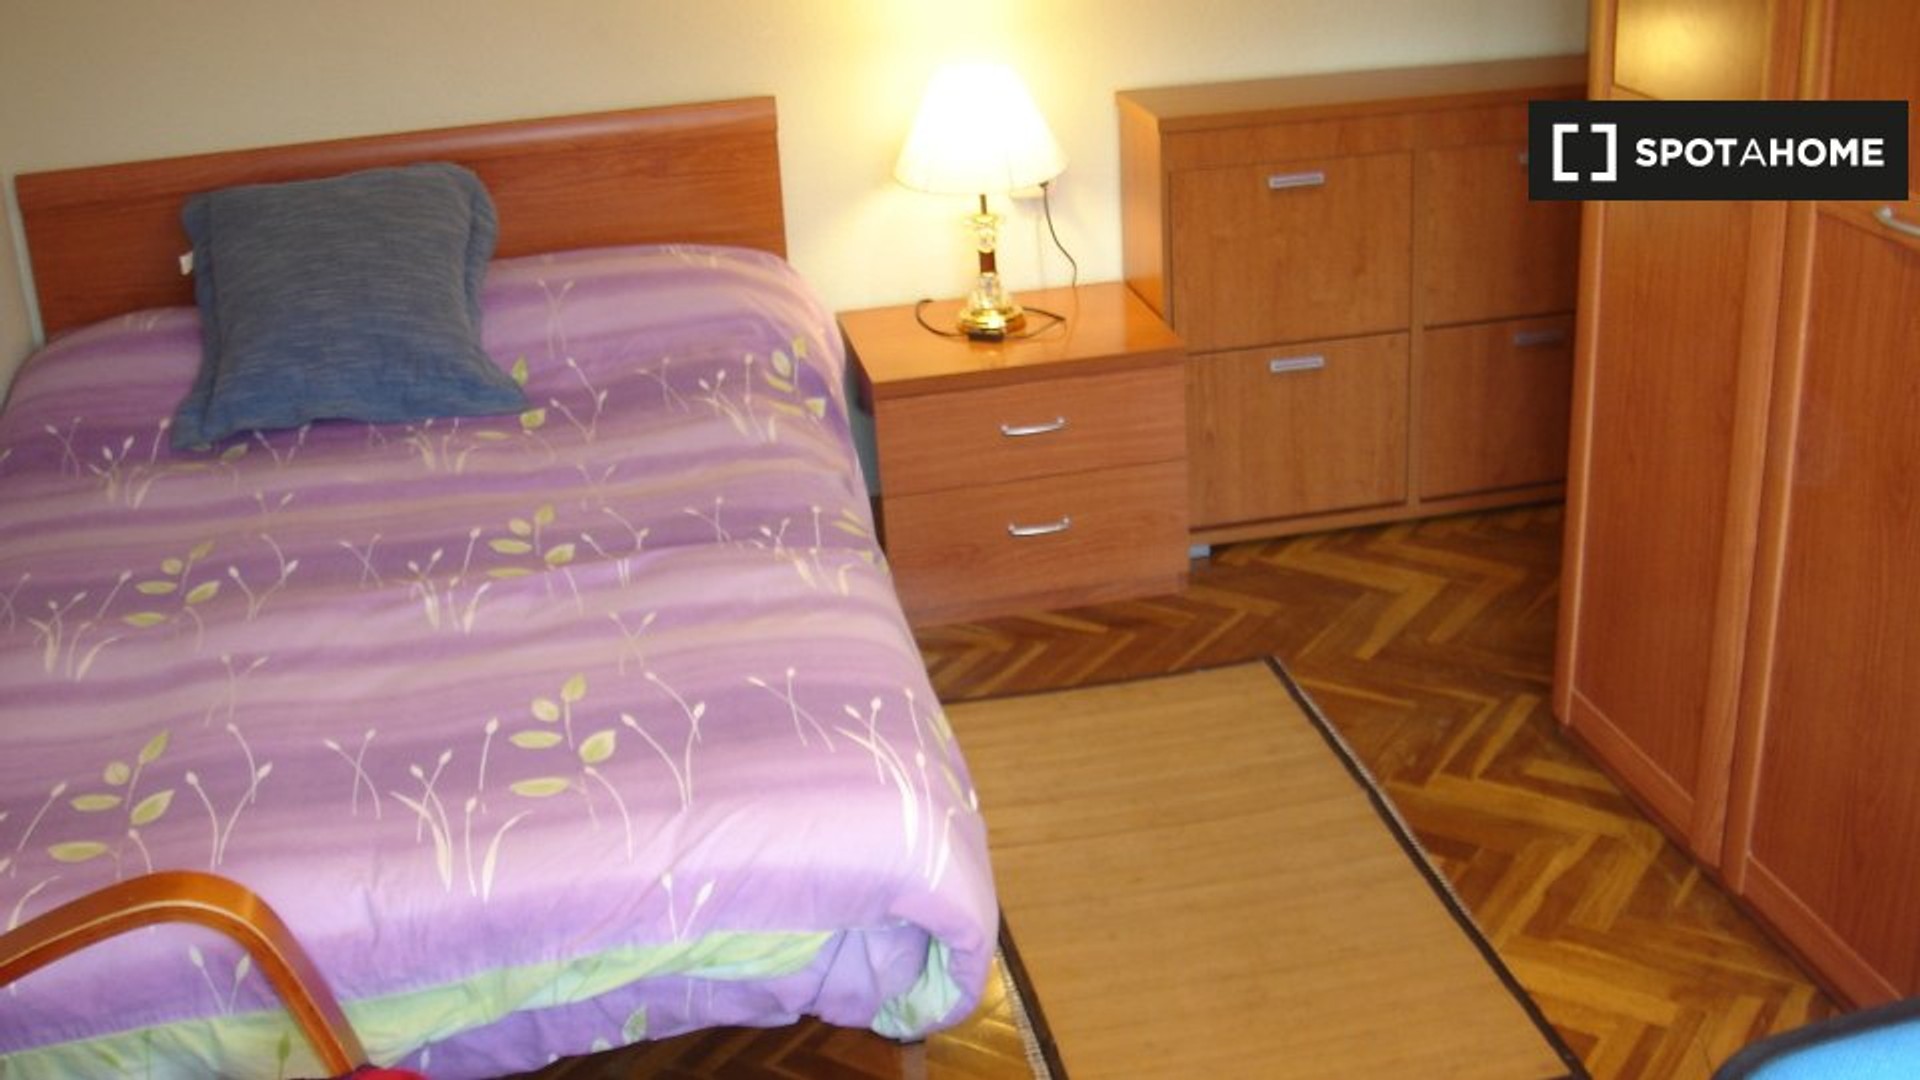 Room for rent in a shared flat in Salamanca